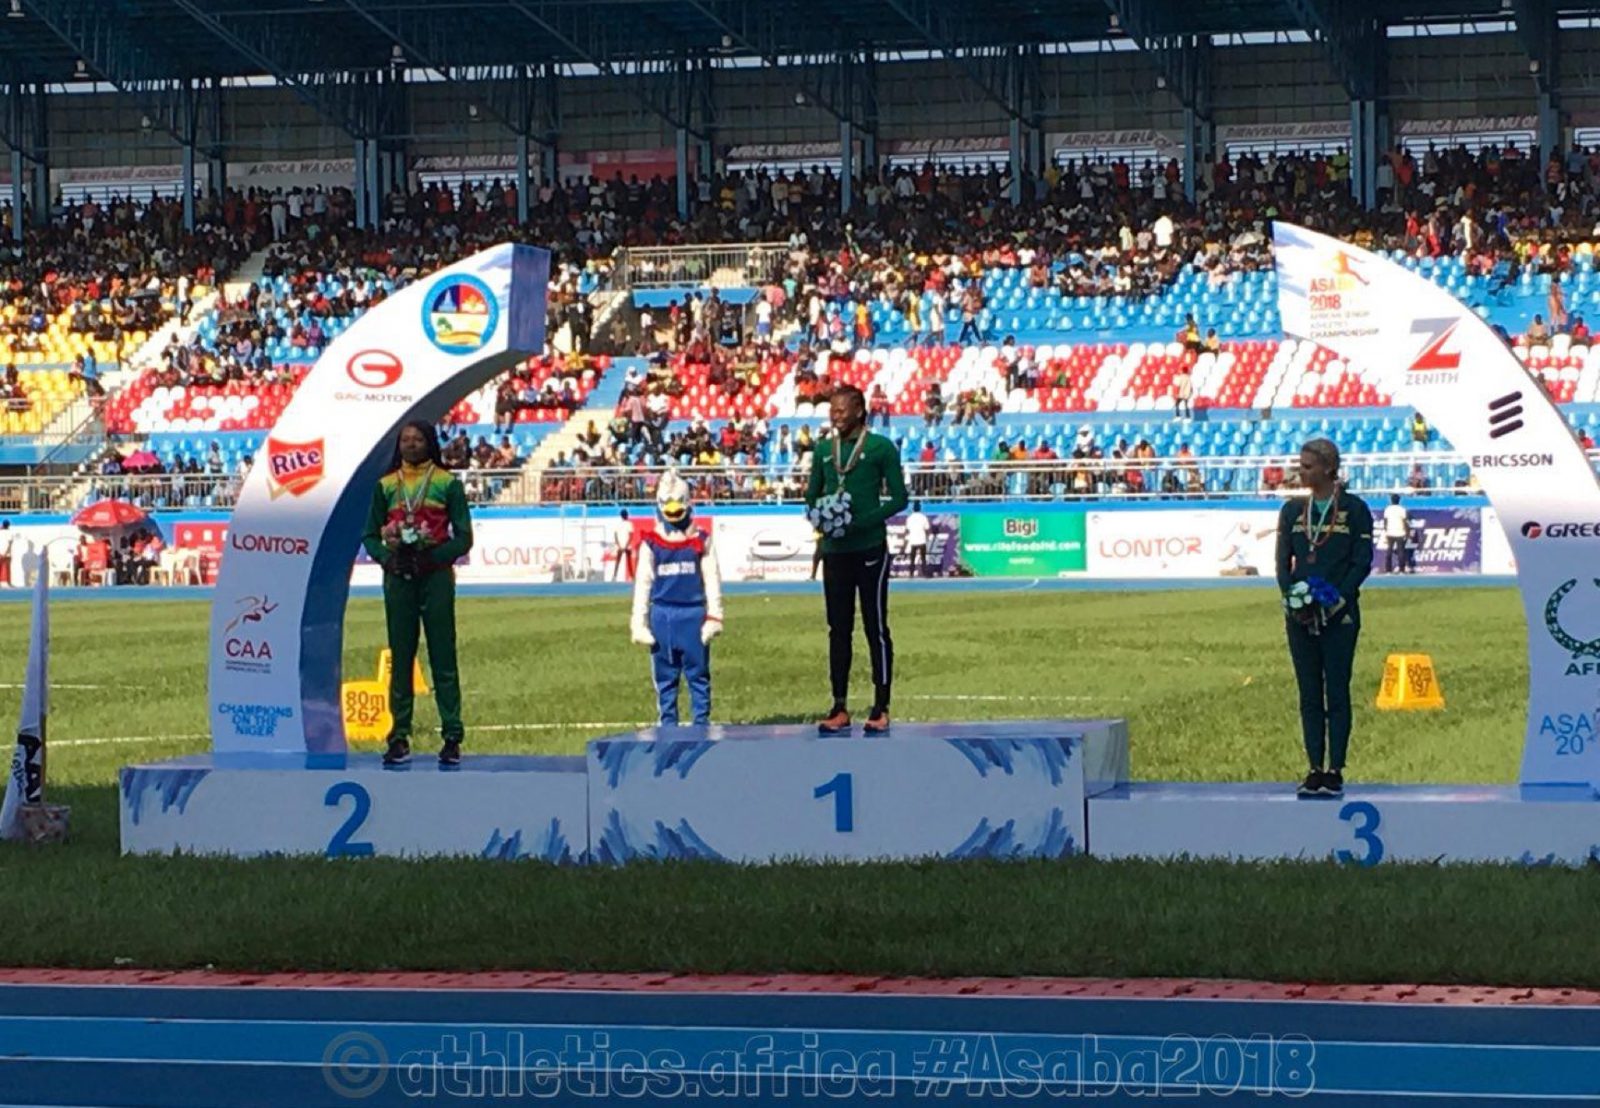 Medal presentation to Ese Brume and other medallists - women's Long Jump - Asaba 2018 / Photo credit: Yomi Omogbeja for Athletics Africa